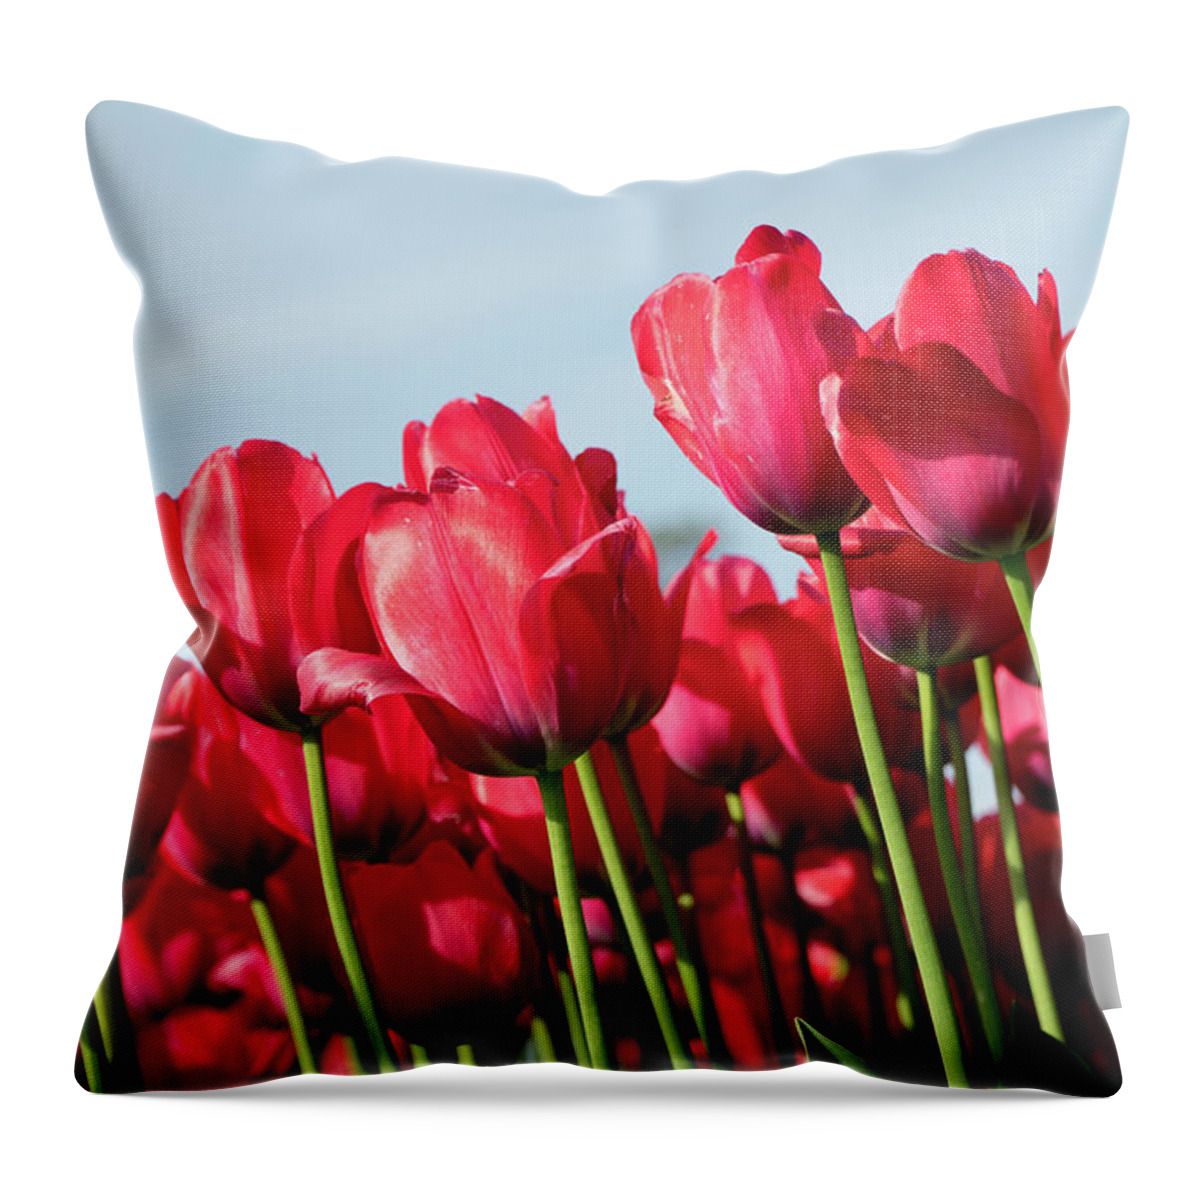 The Image Of Red Tulips Taken By Rich Sirko. Throw Pillow featuring the photograph Red Tulips by Rich S